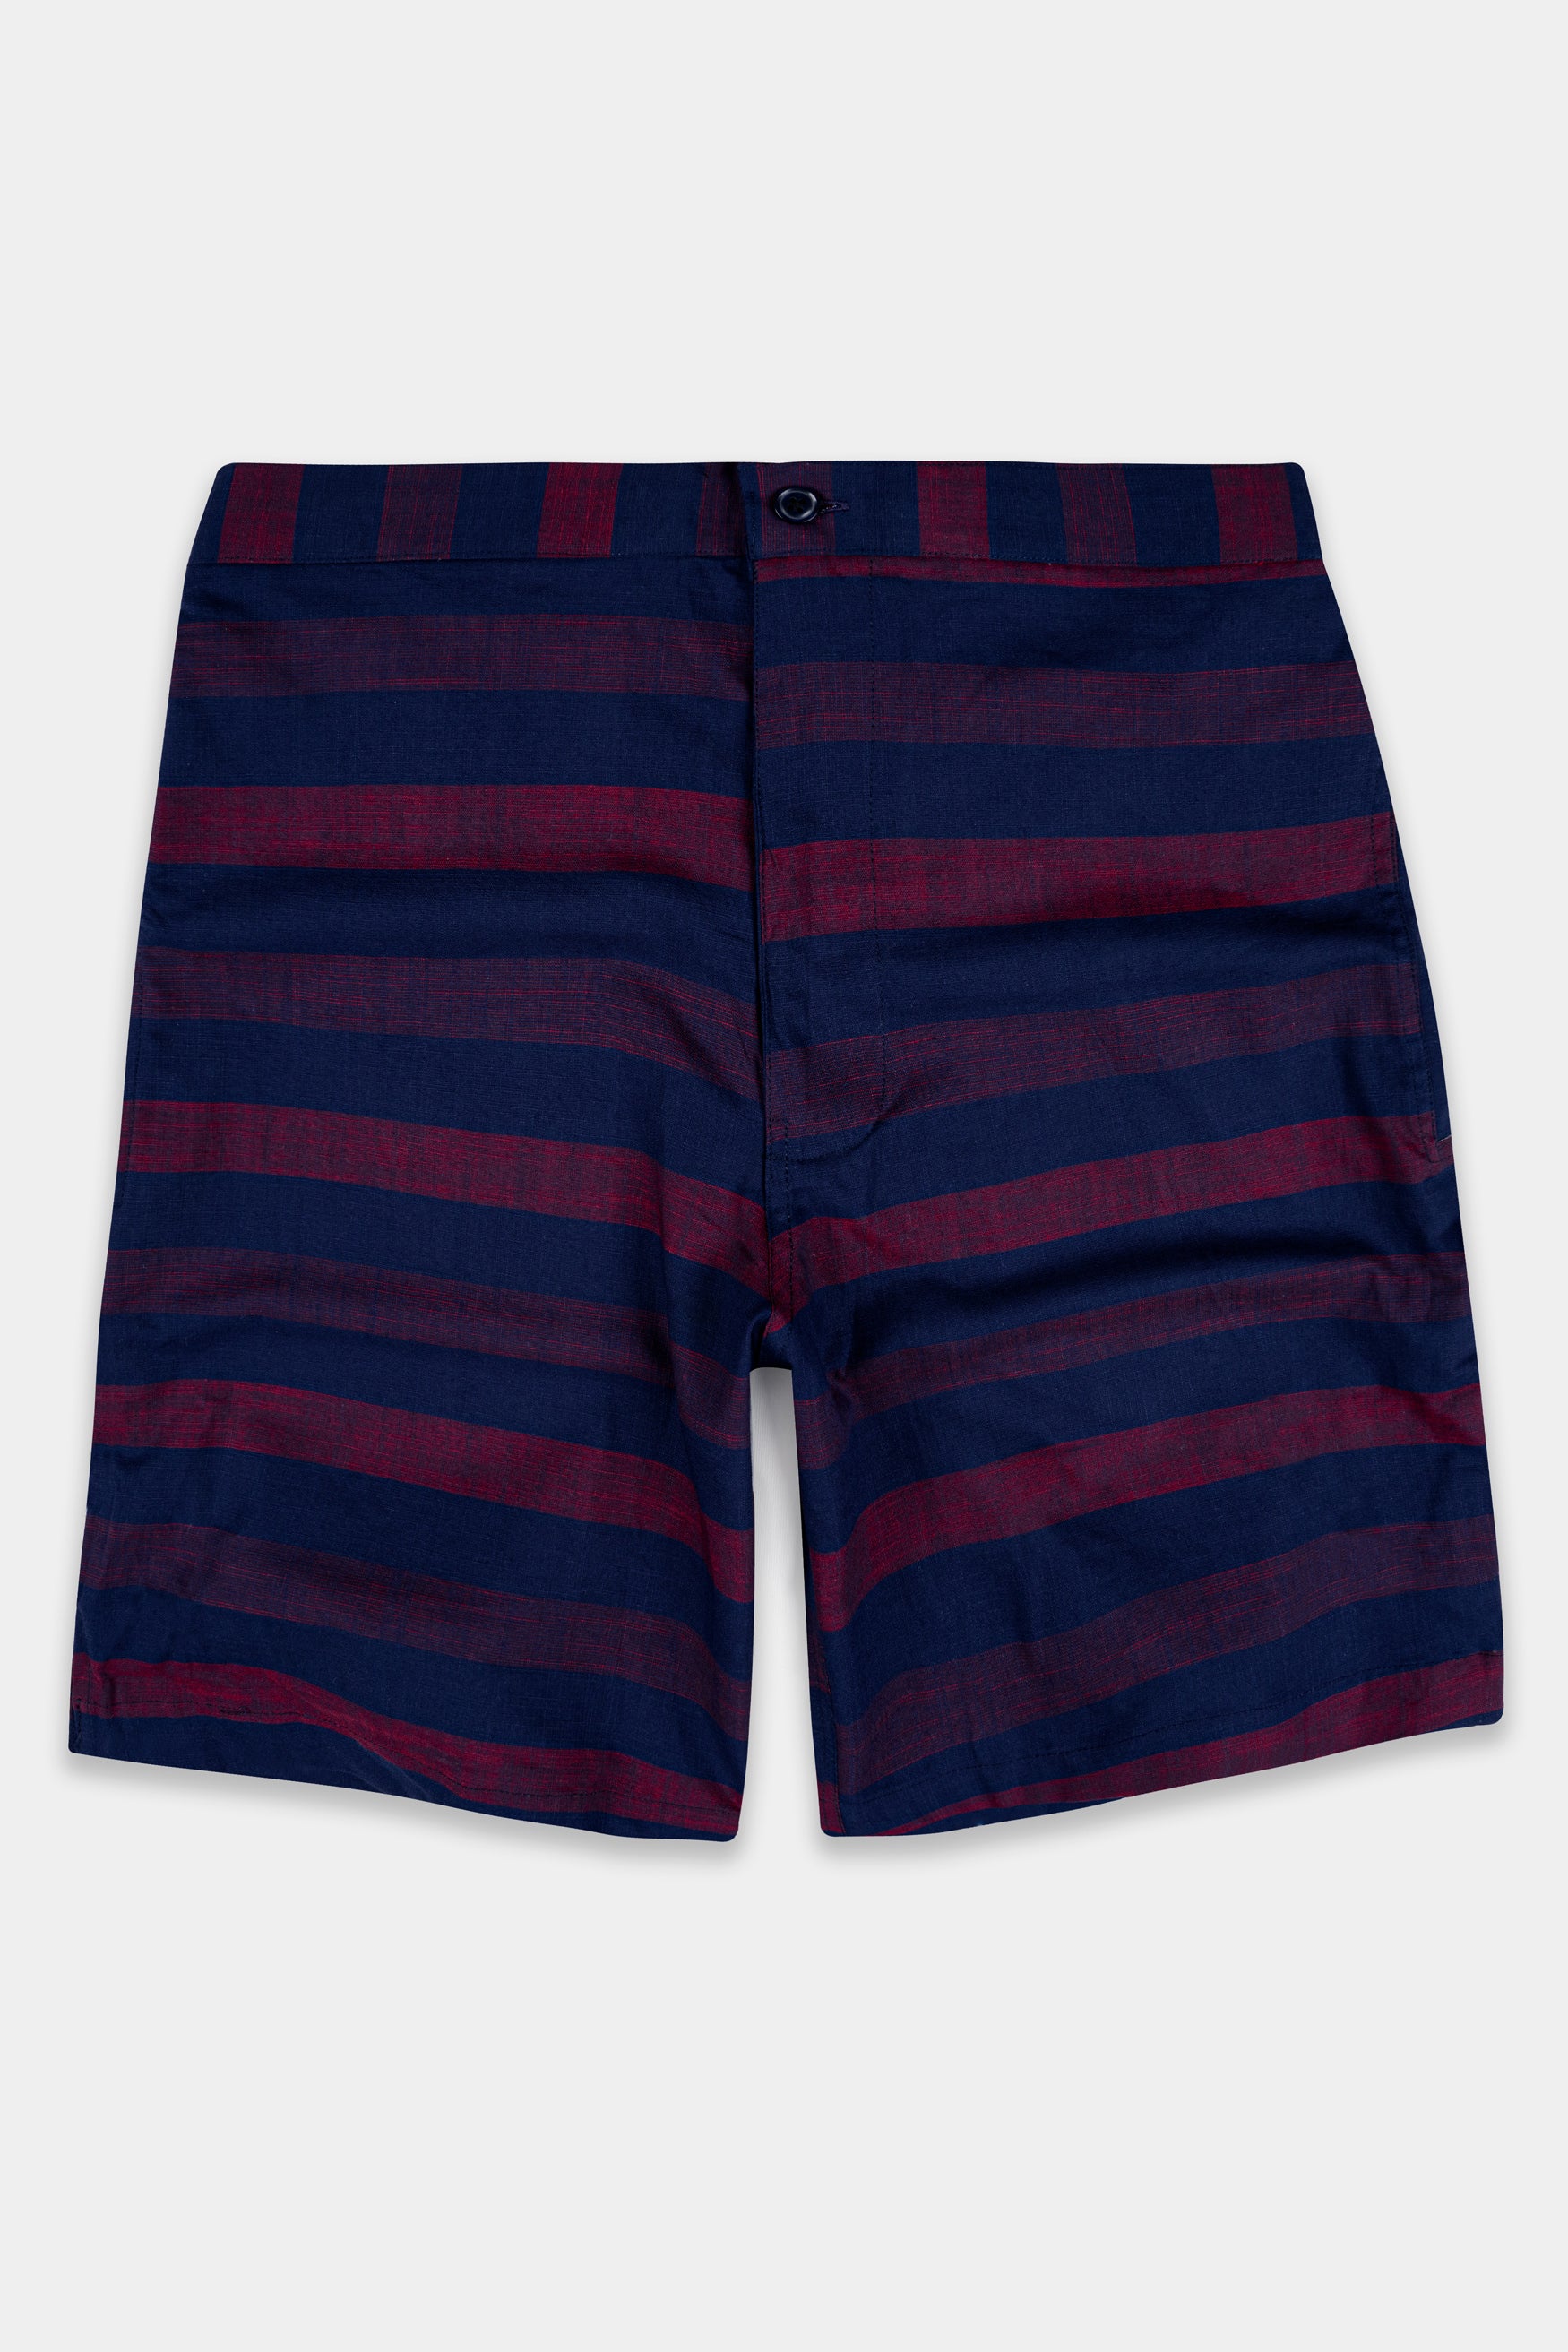 Midnight Blue and Mauve Pink Striped Chambray Shorts SR389-28, SR389-30, SR389-32, SR389-34, SR389-36, SR389-38, SR389-40, SR389-42, SR389-44